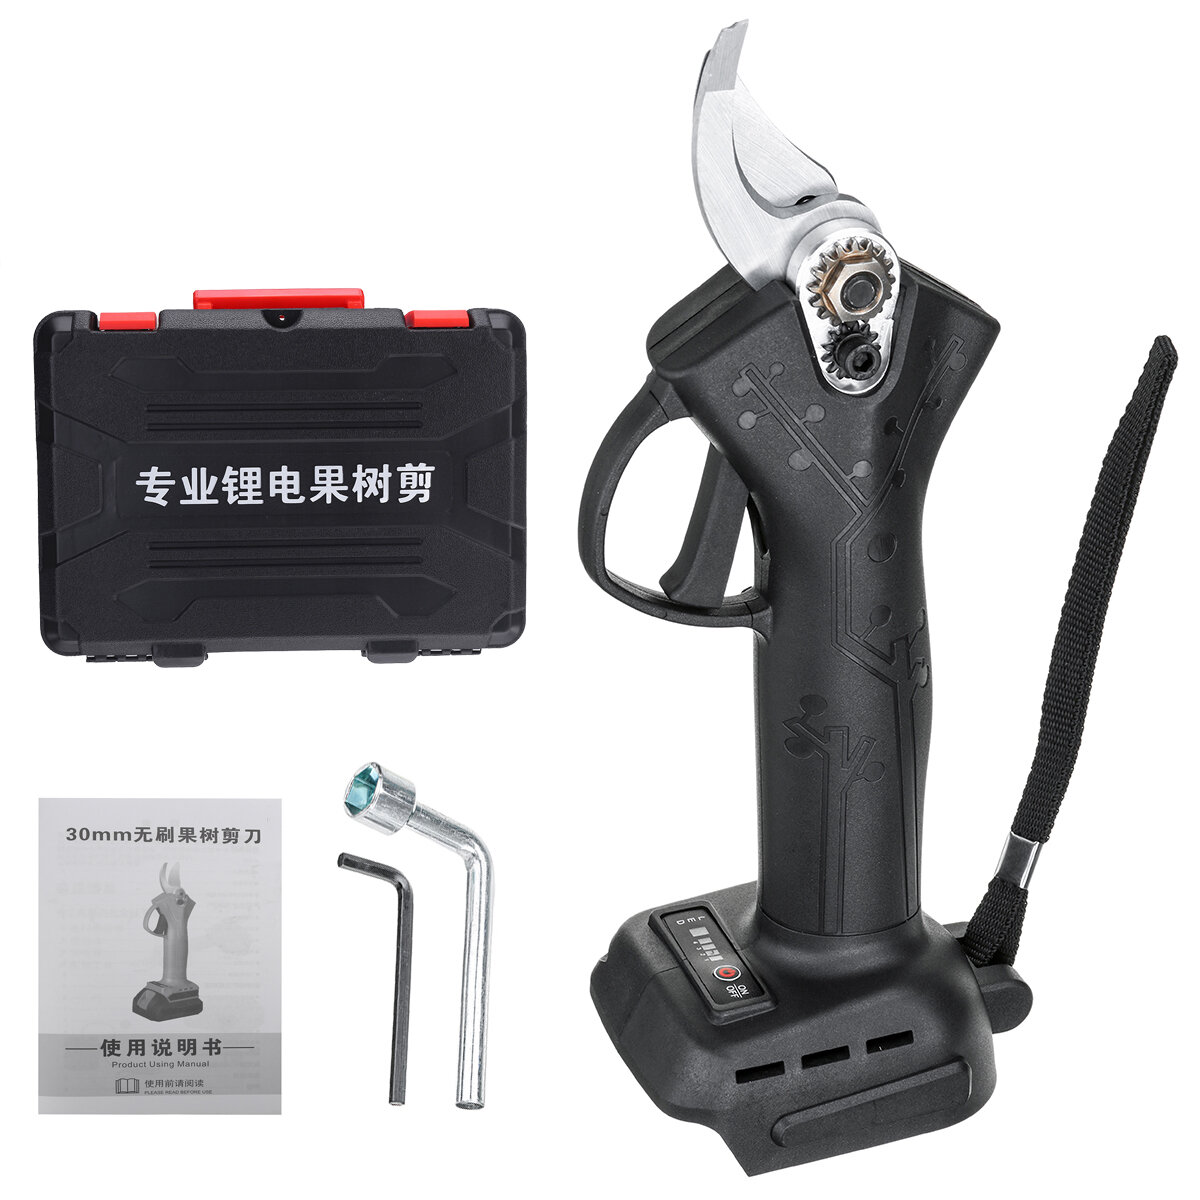 

30mm 18V Electric Garden Pruner Scissors Cordless Sharp Pruning Shears Branch Cutter Adapted To Makita Battery With Plas